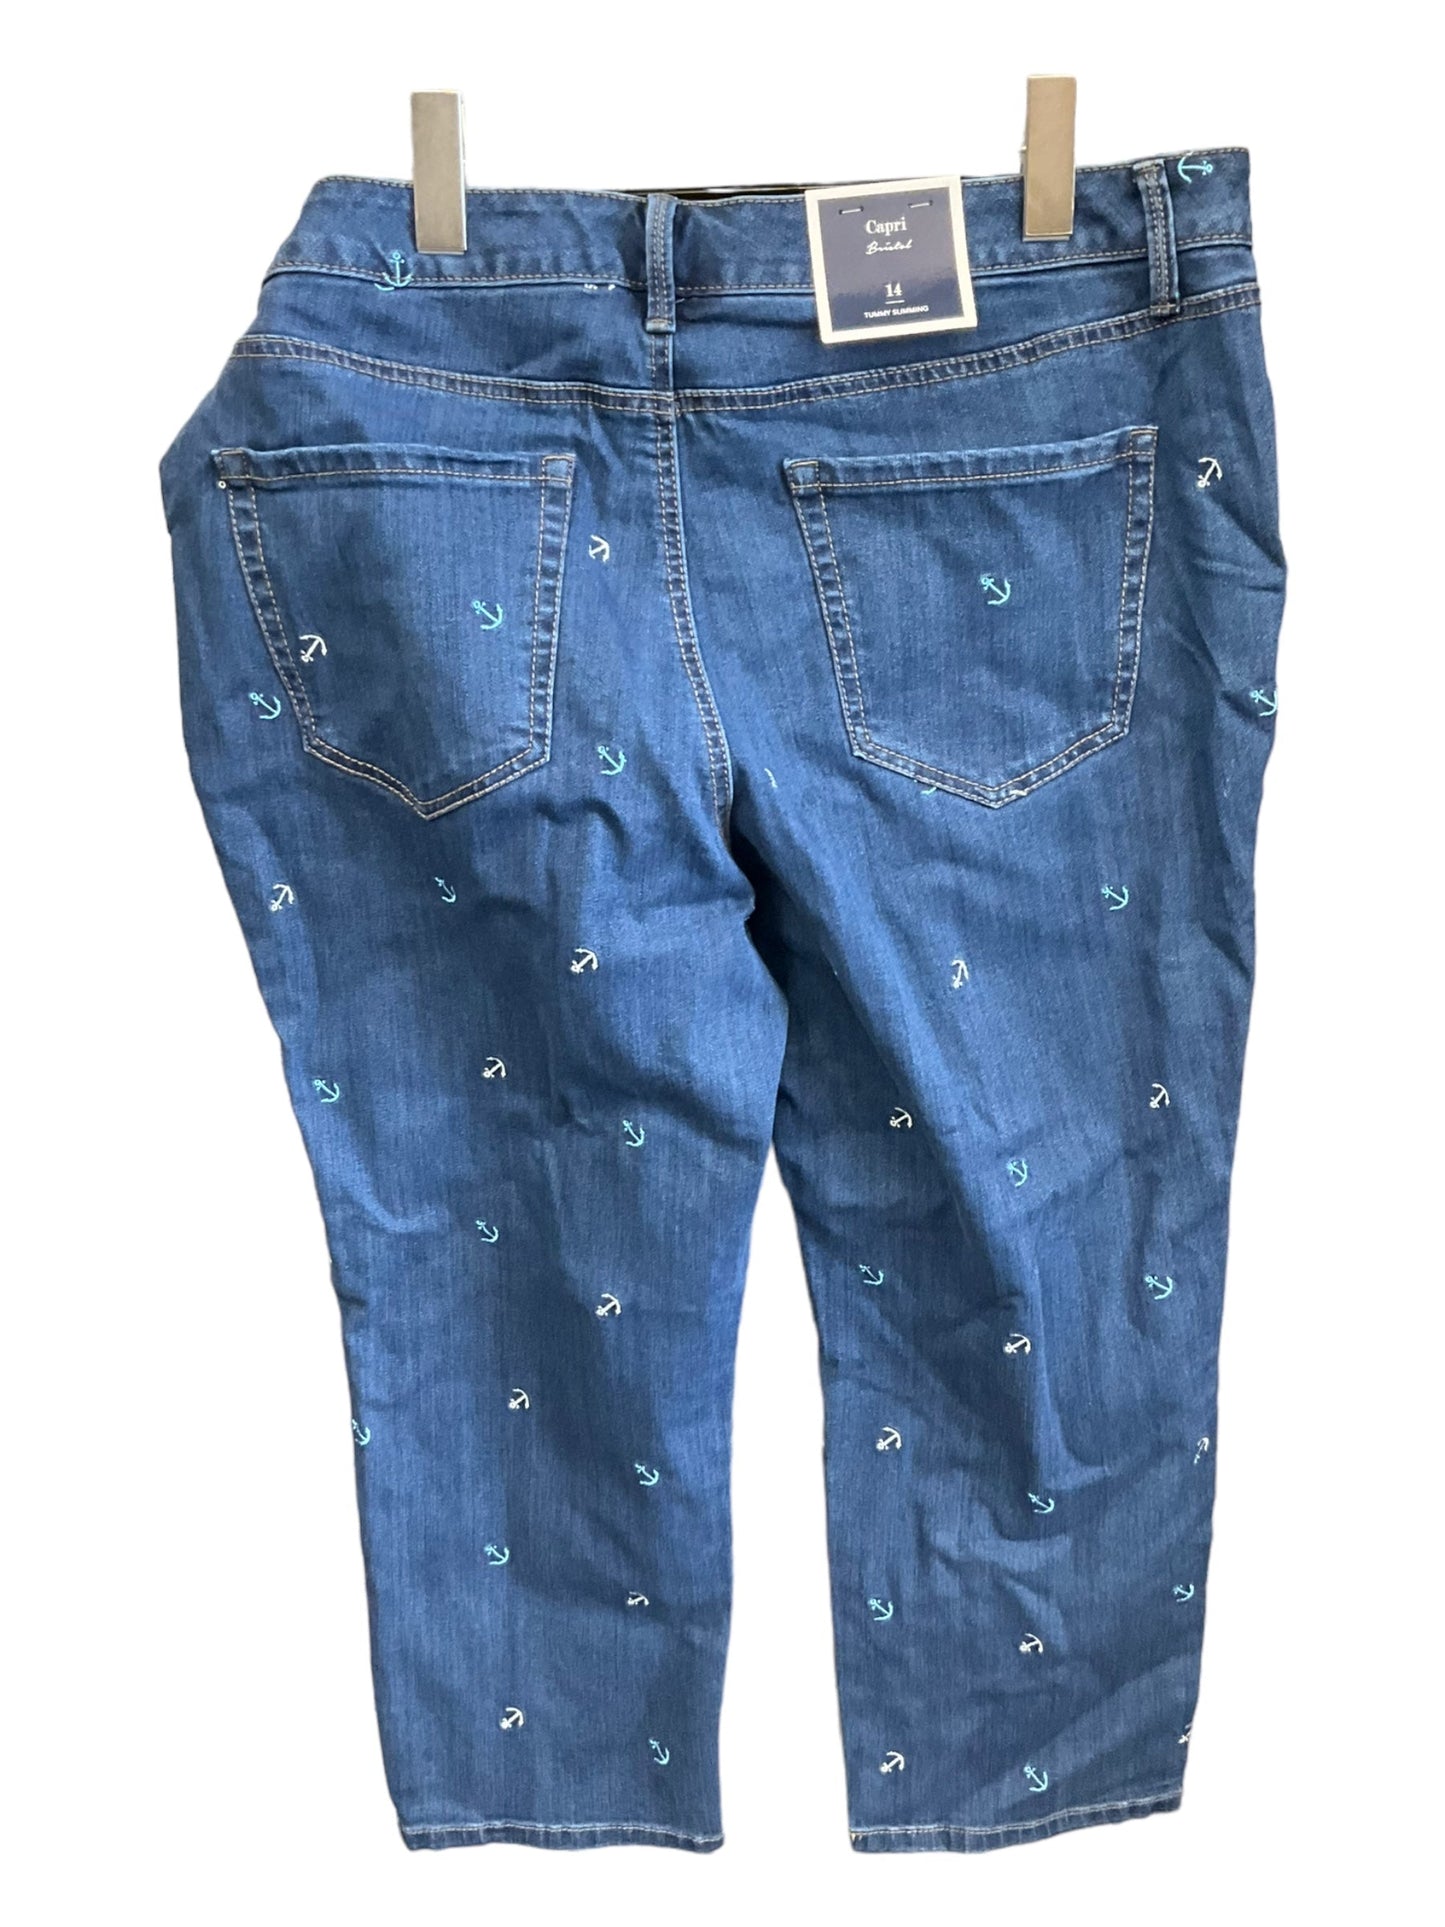 Capris By Charter Club  Size: 14